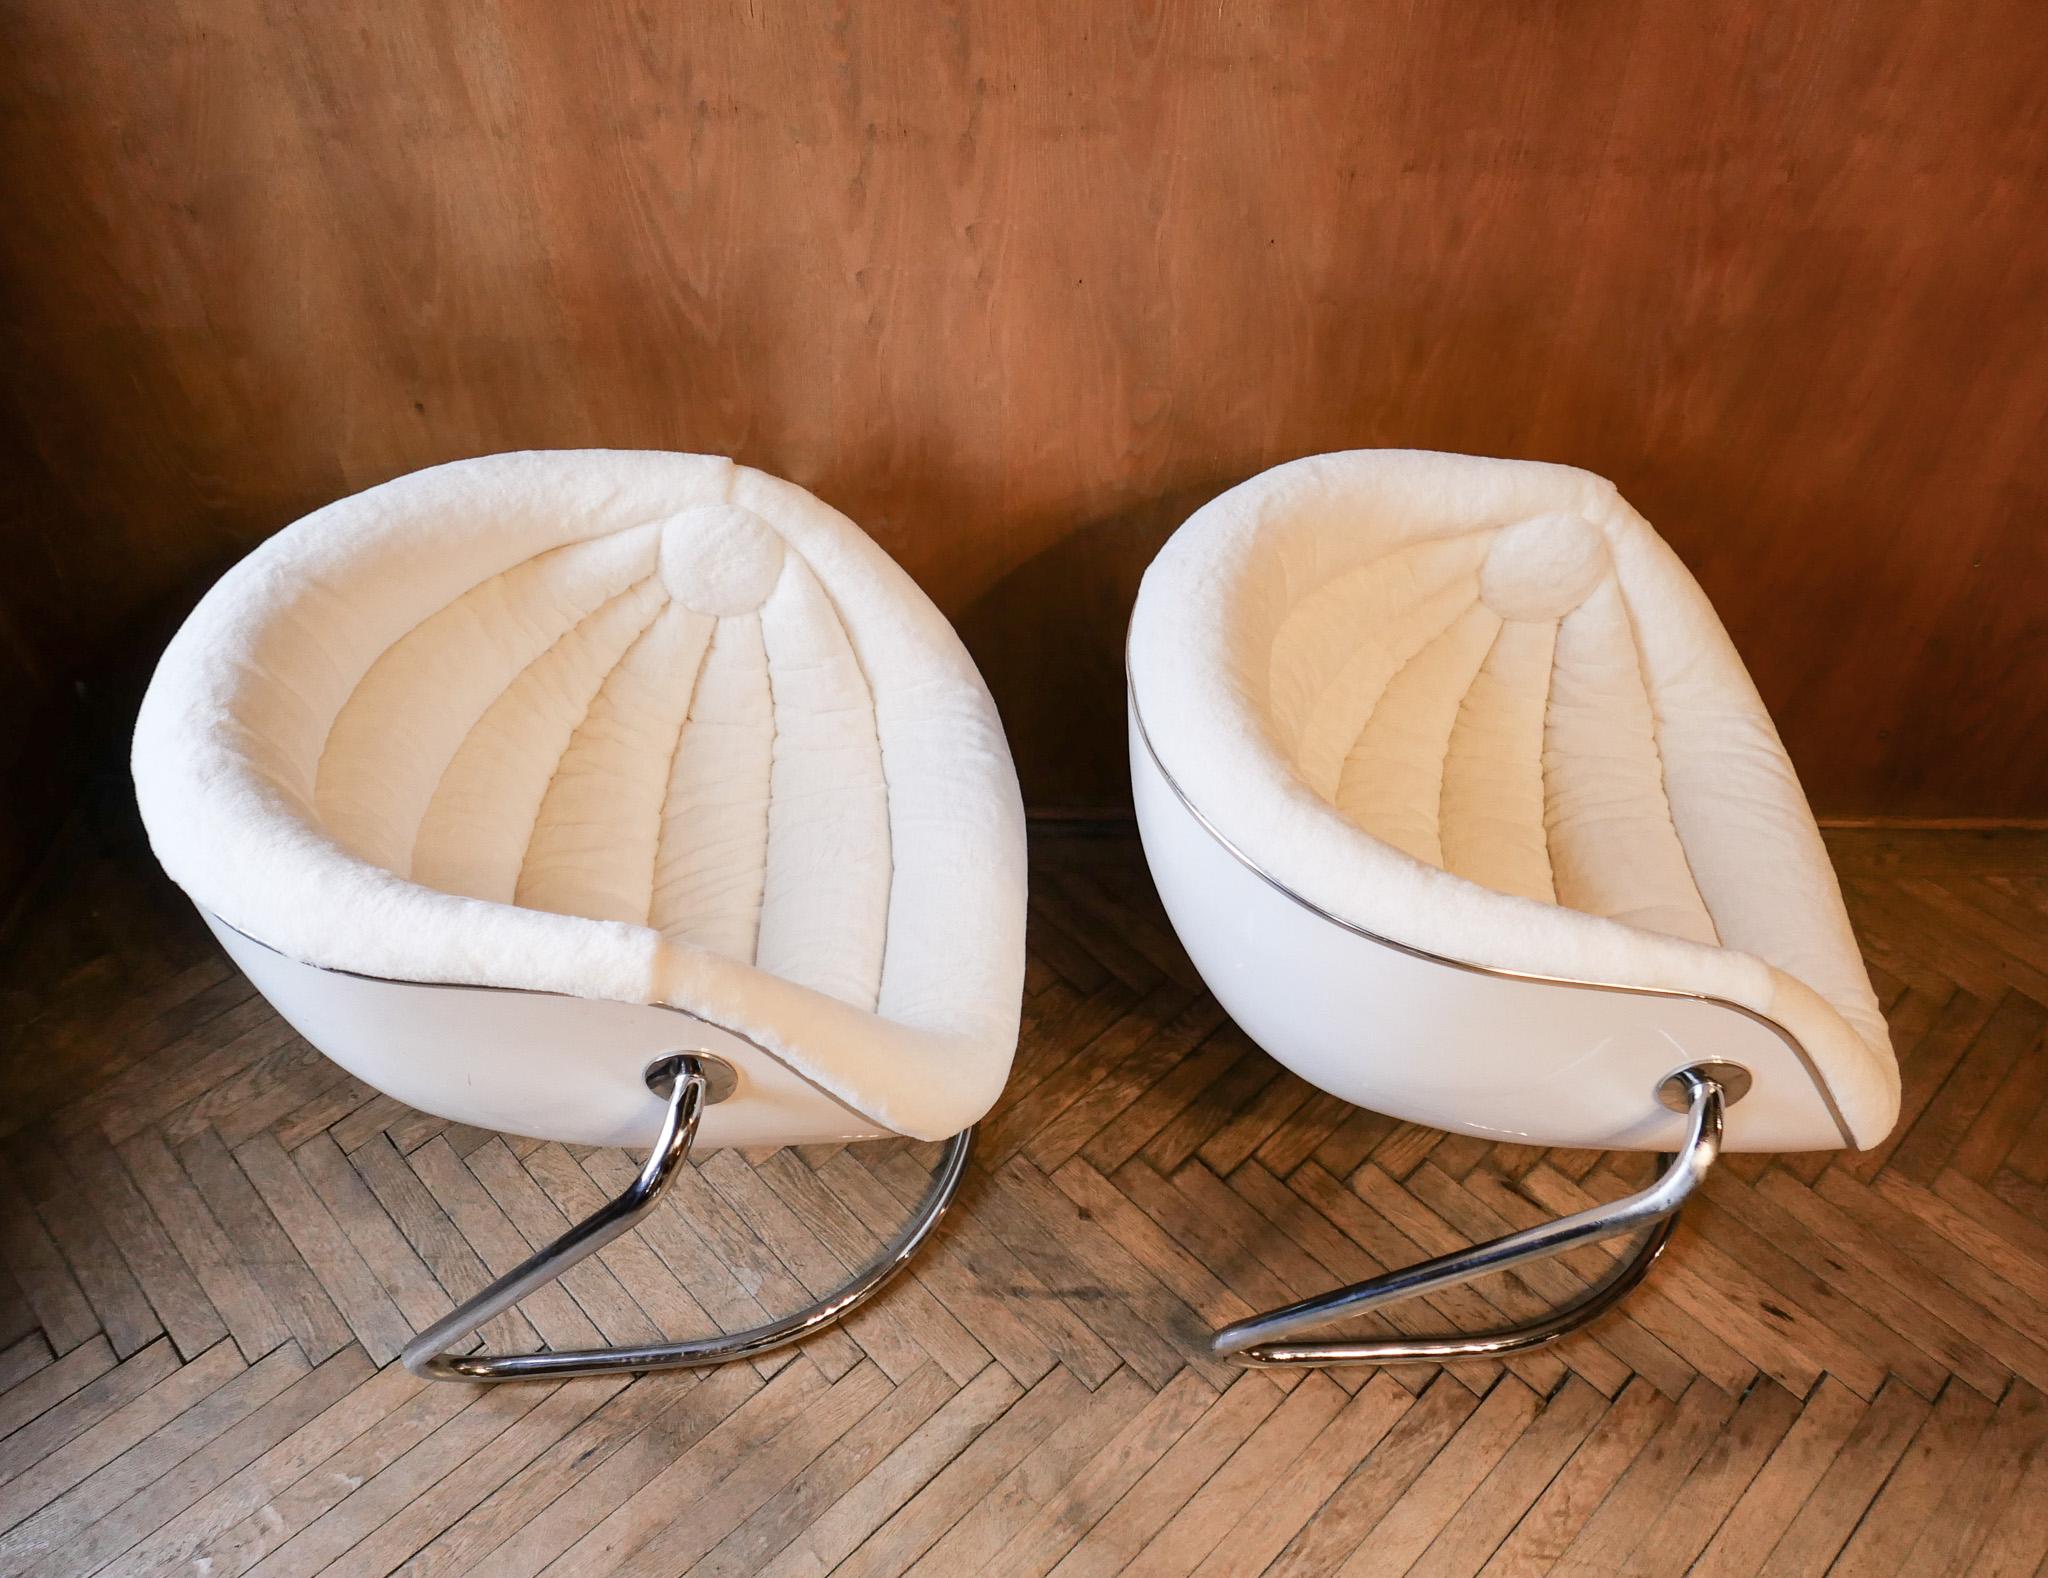 Upholstery Mid-Century Modern Space Age White Fiberglass Plush Lounge Chairs, Italy, 1970s